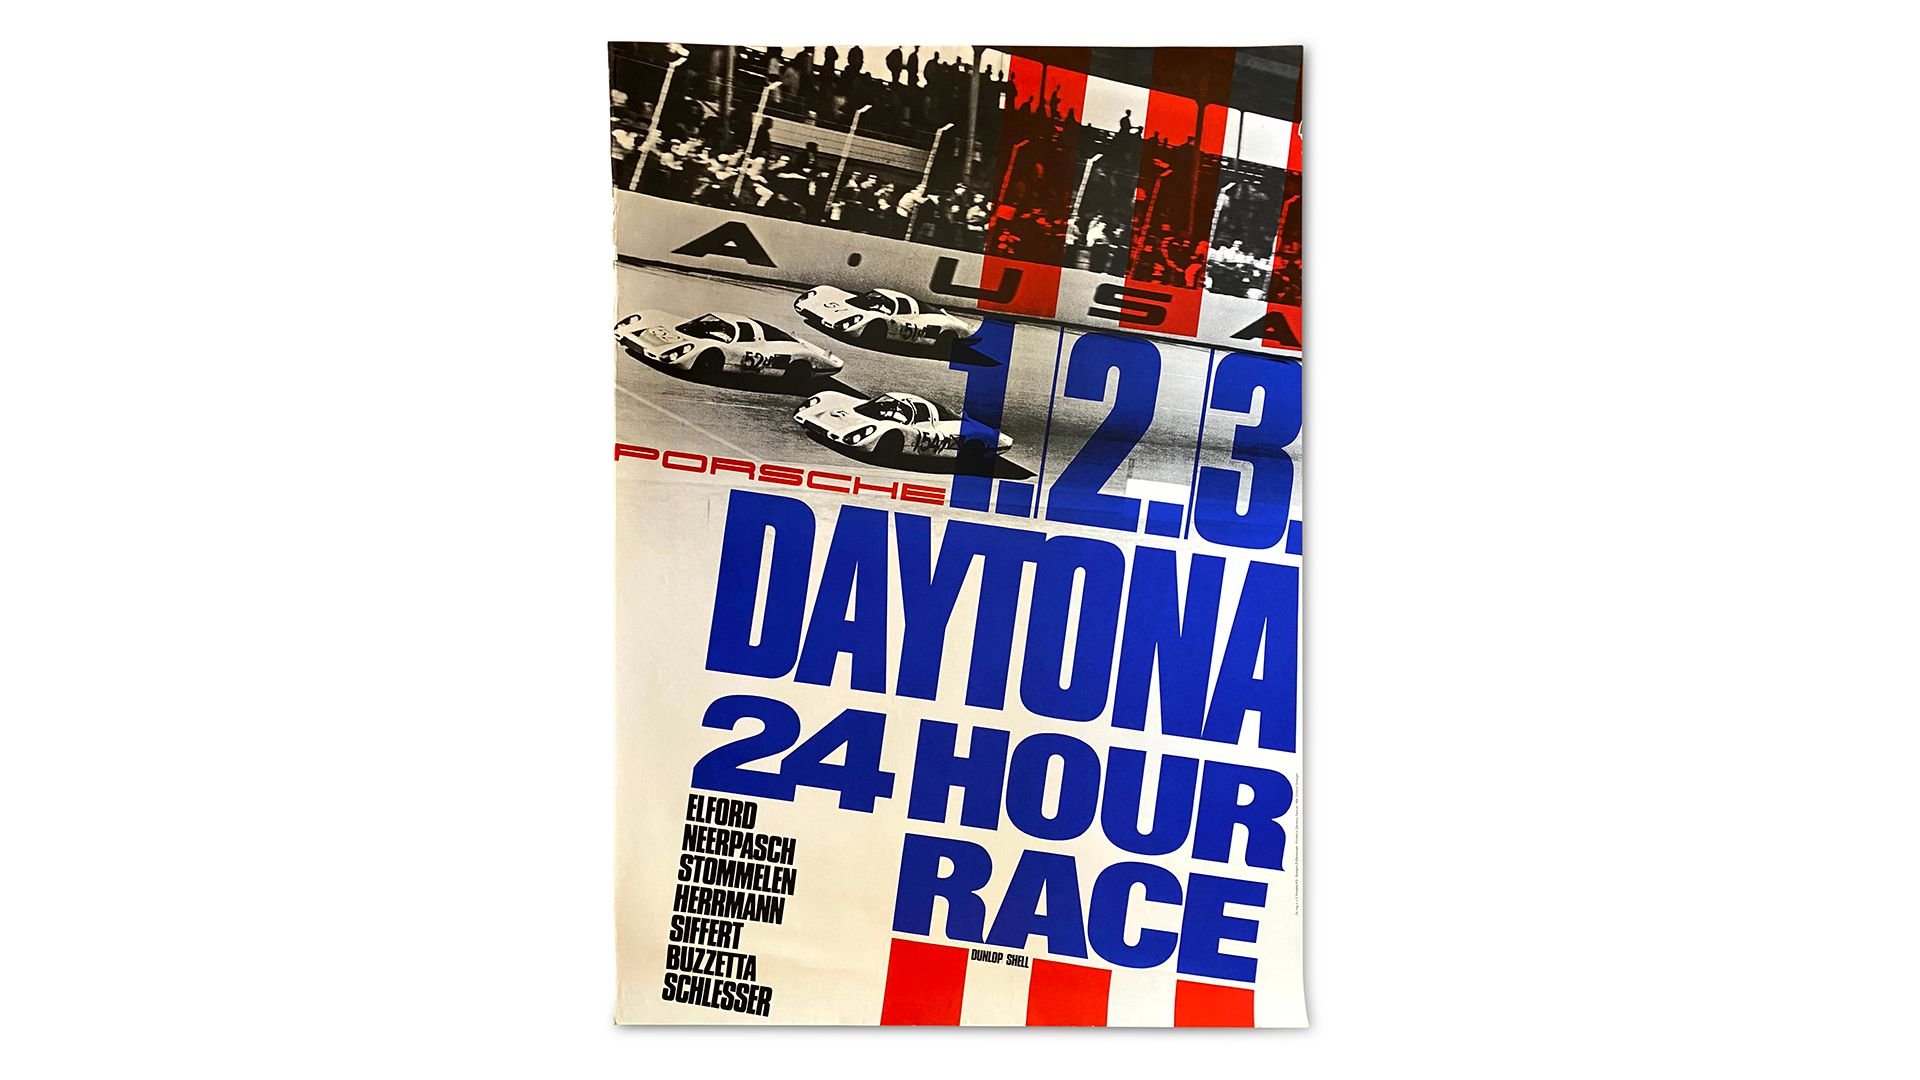 For Sale Group of 11 Porsche Sports Racing Prototype (907, 908, 908/2, 908/3) Factory Racing Posters 1968-1970